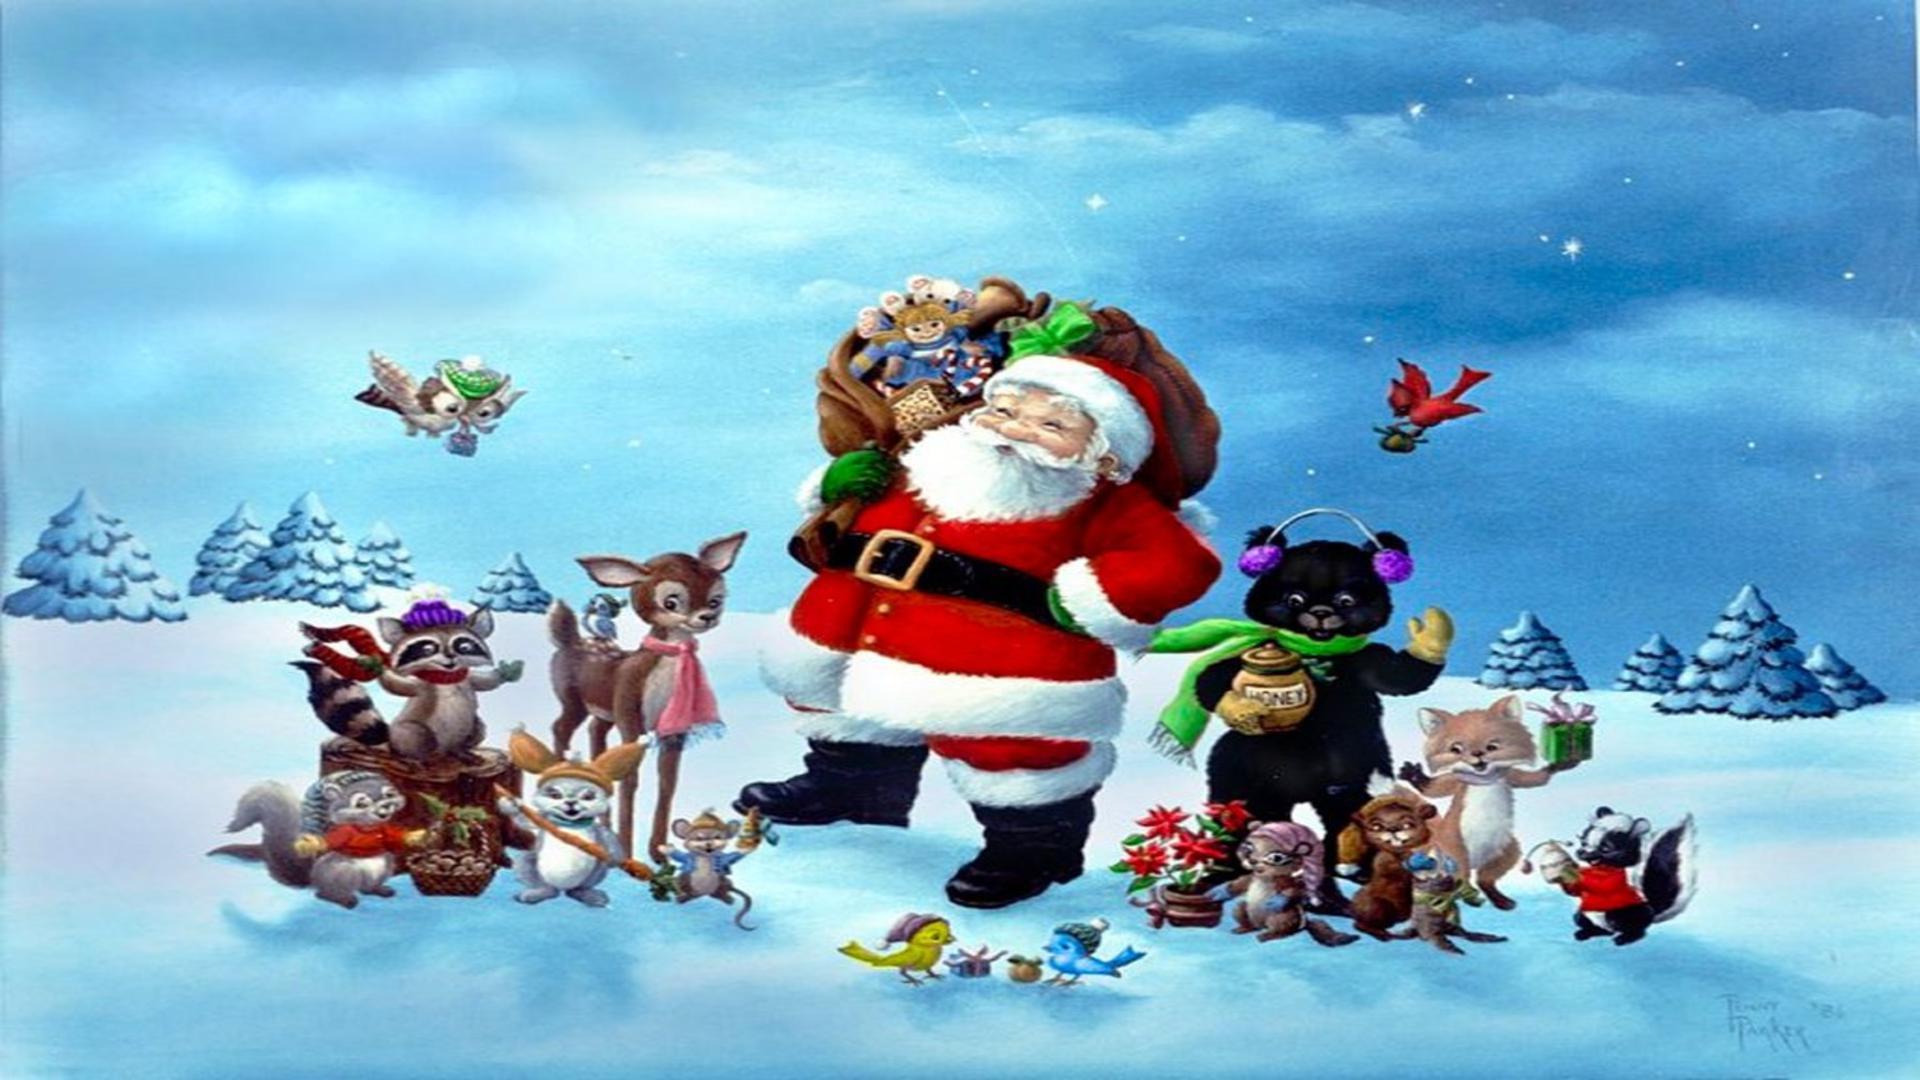 Merry Christmas 2012 HD wallpaper Have A PC. I Have A PC